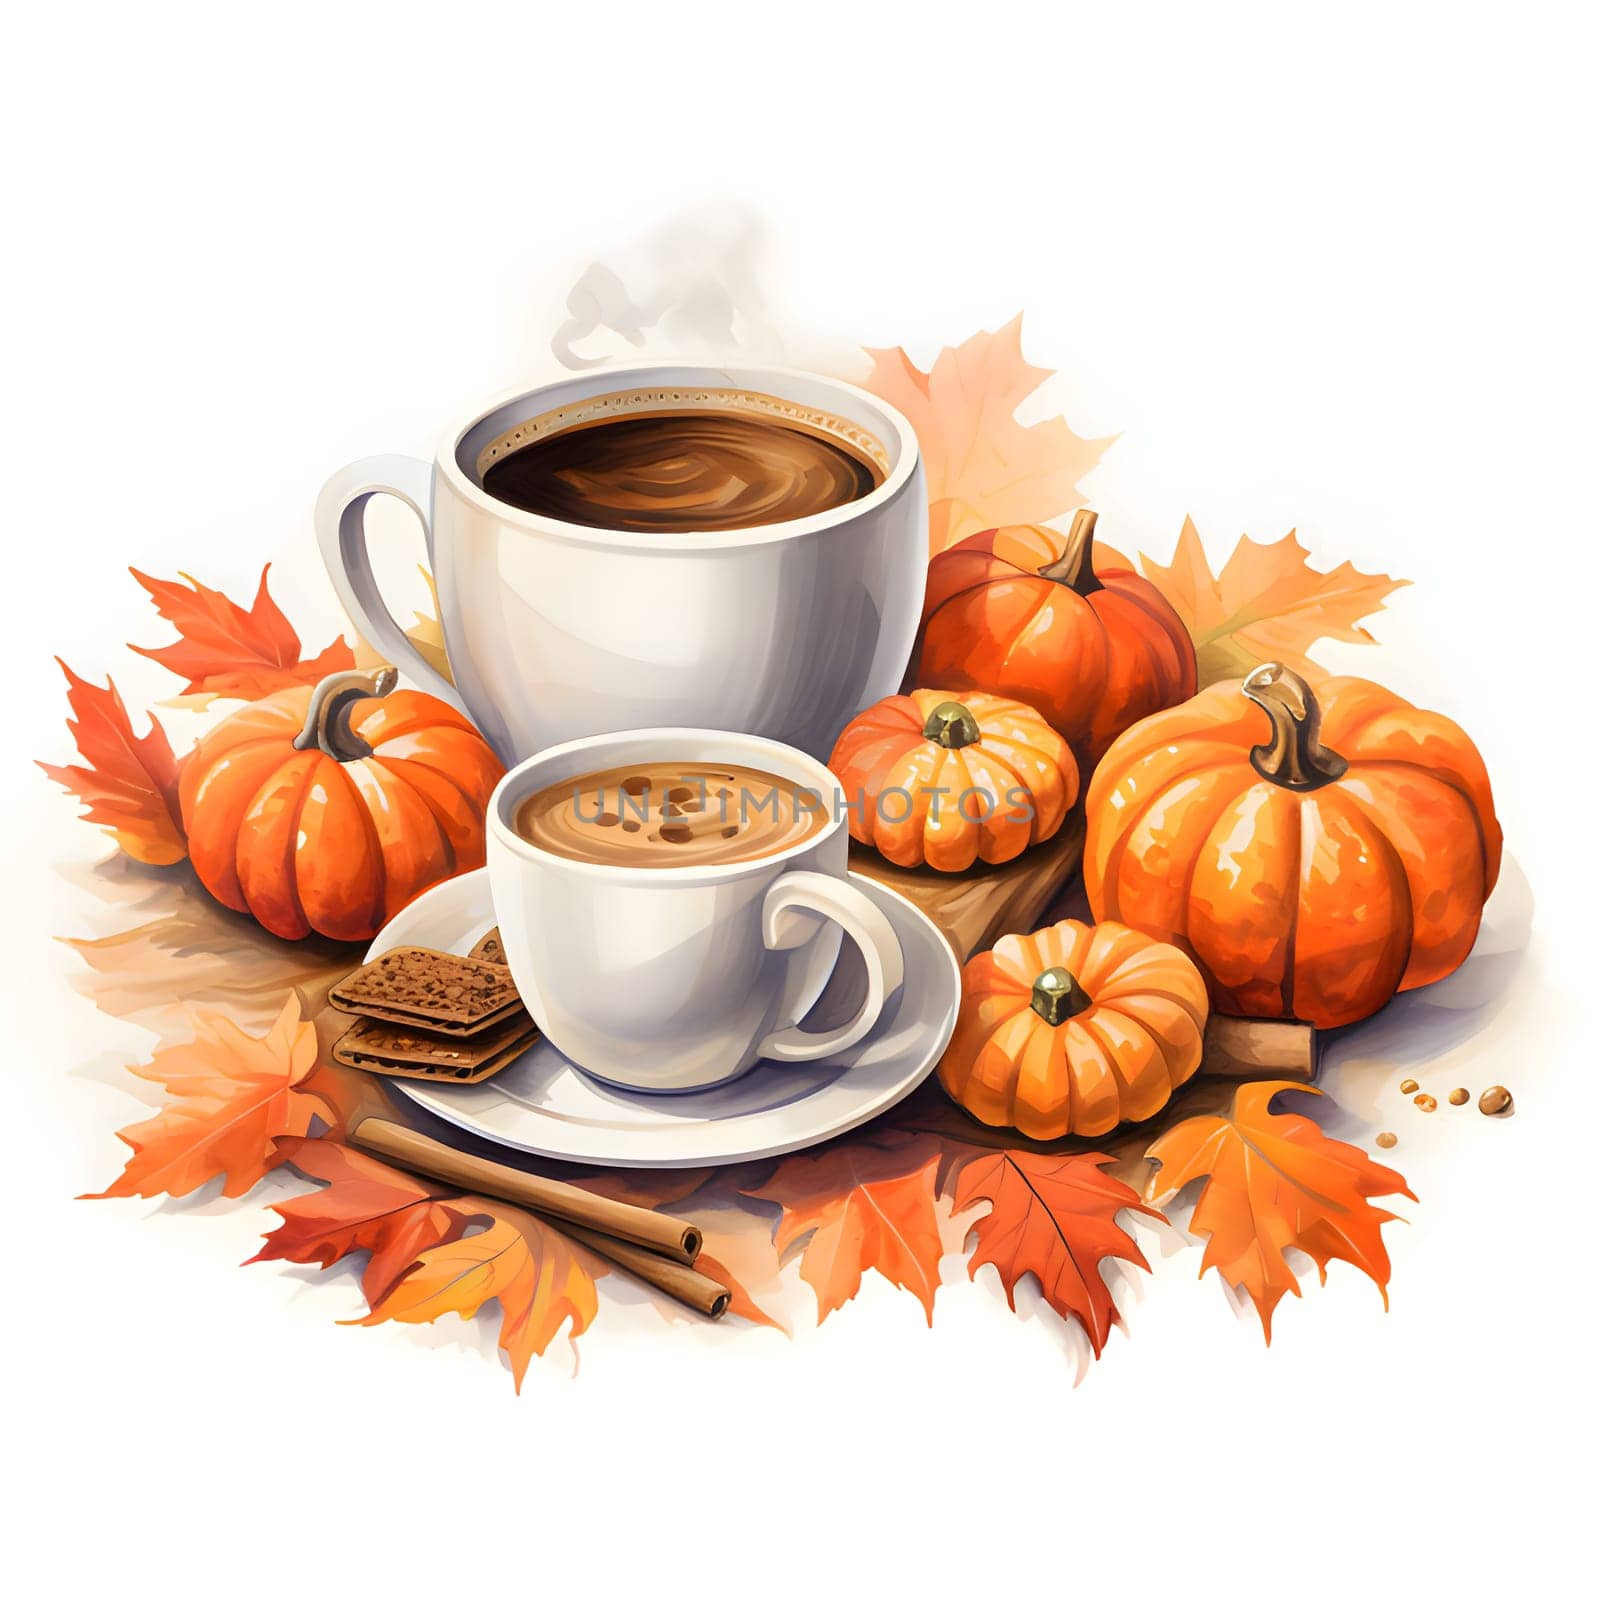 Illustration; hot coffee in a cup around leaves and pumpkins. Pumpkin as a dish of thanksgiving for the harvest, picture on a white isolated background. An atmosphere of joy and celebration.